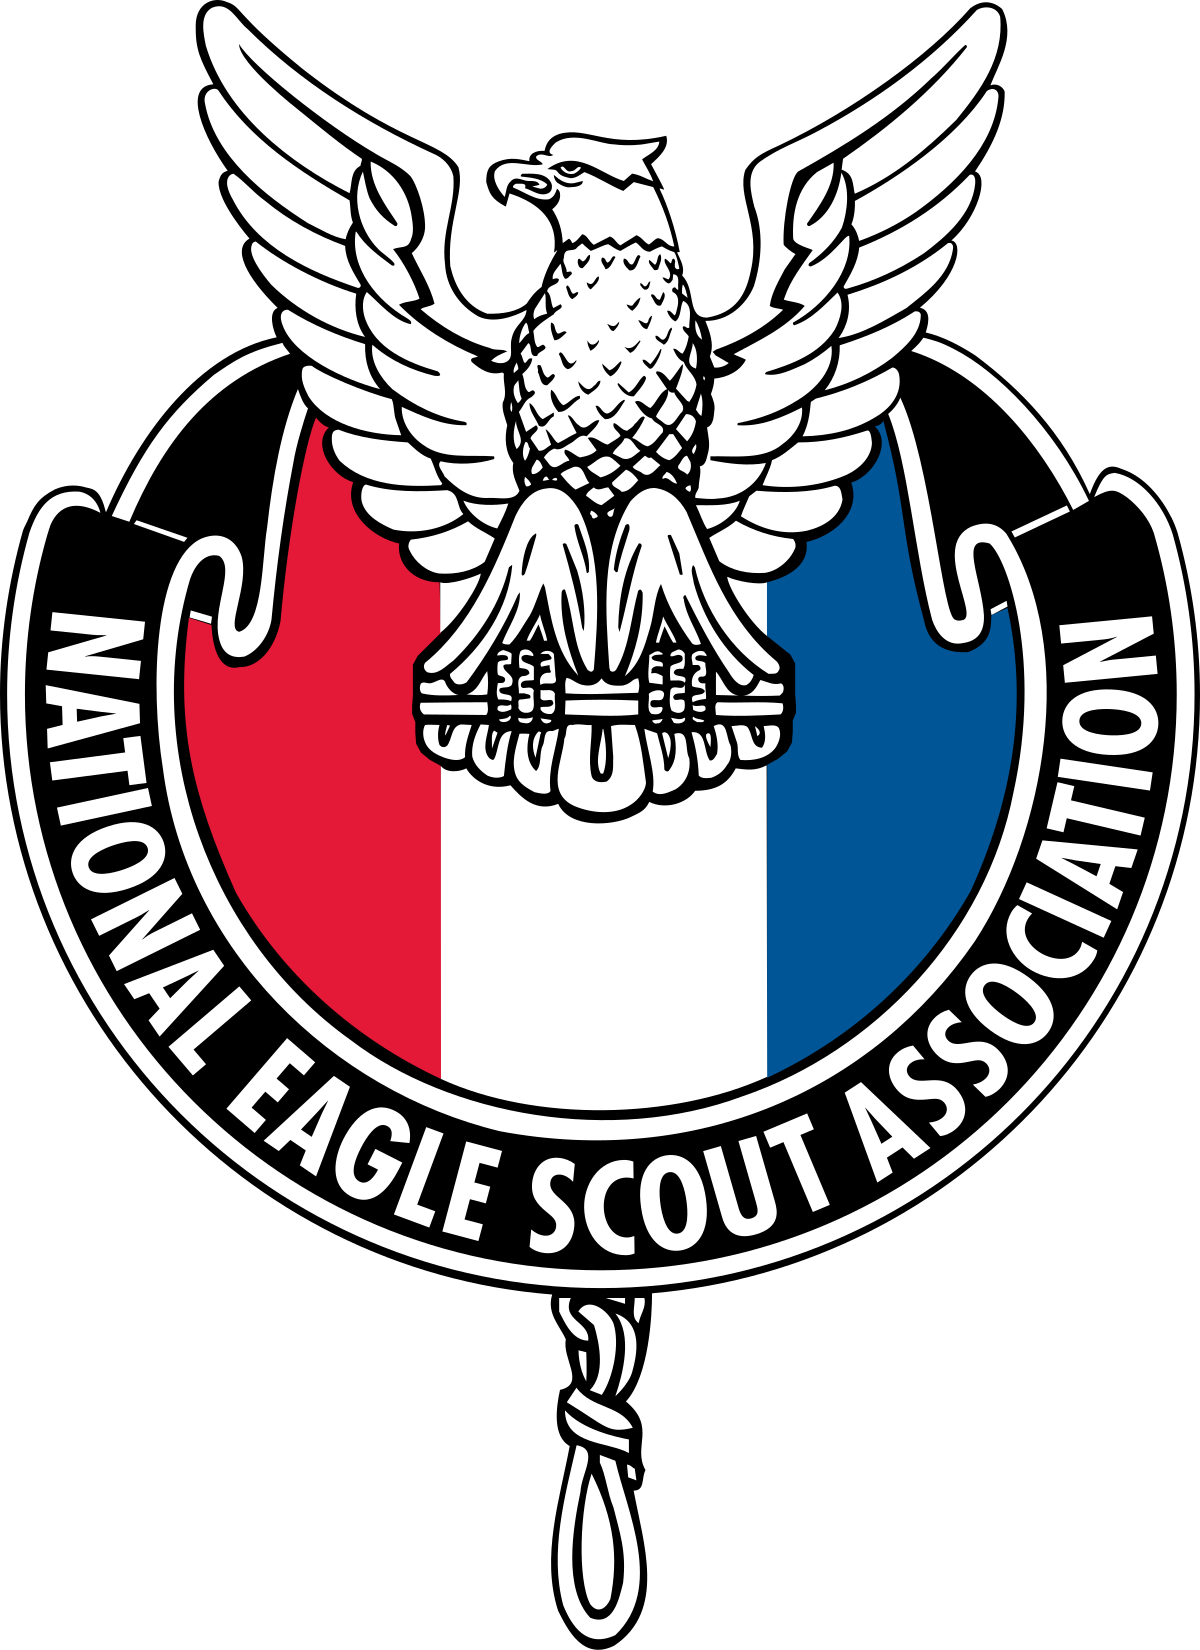 Scout leader - Wikipedia